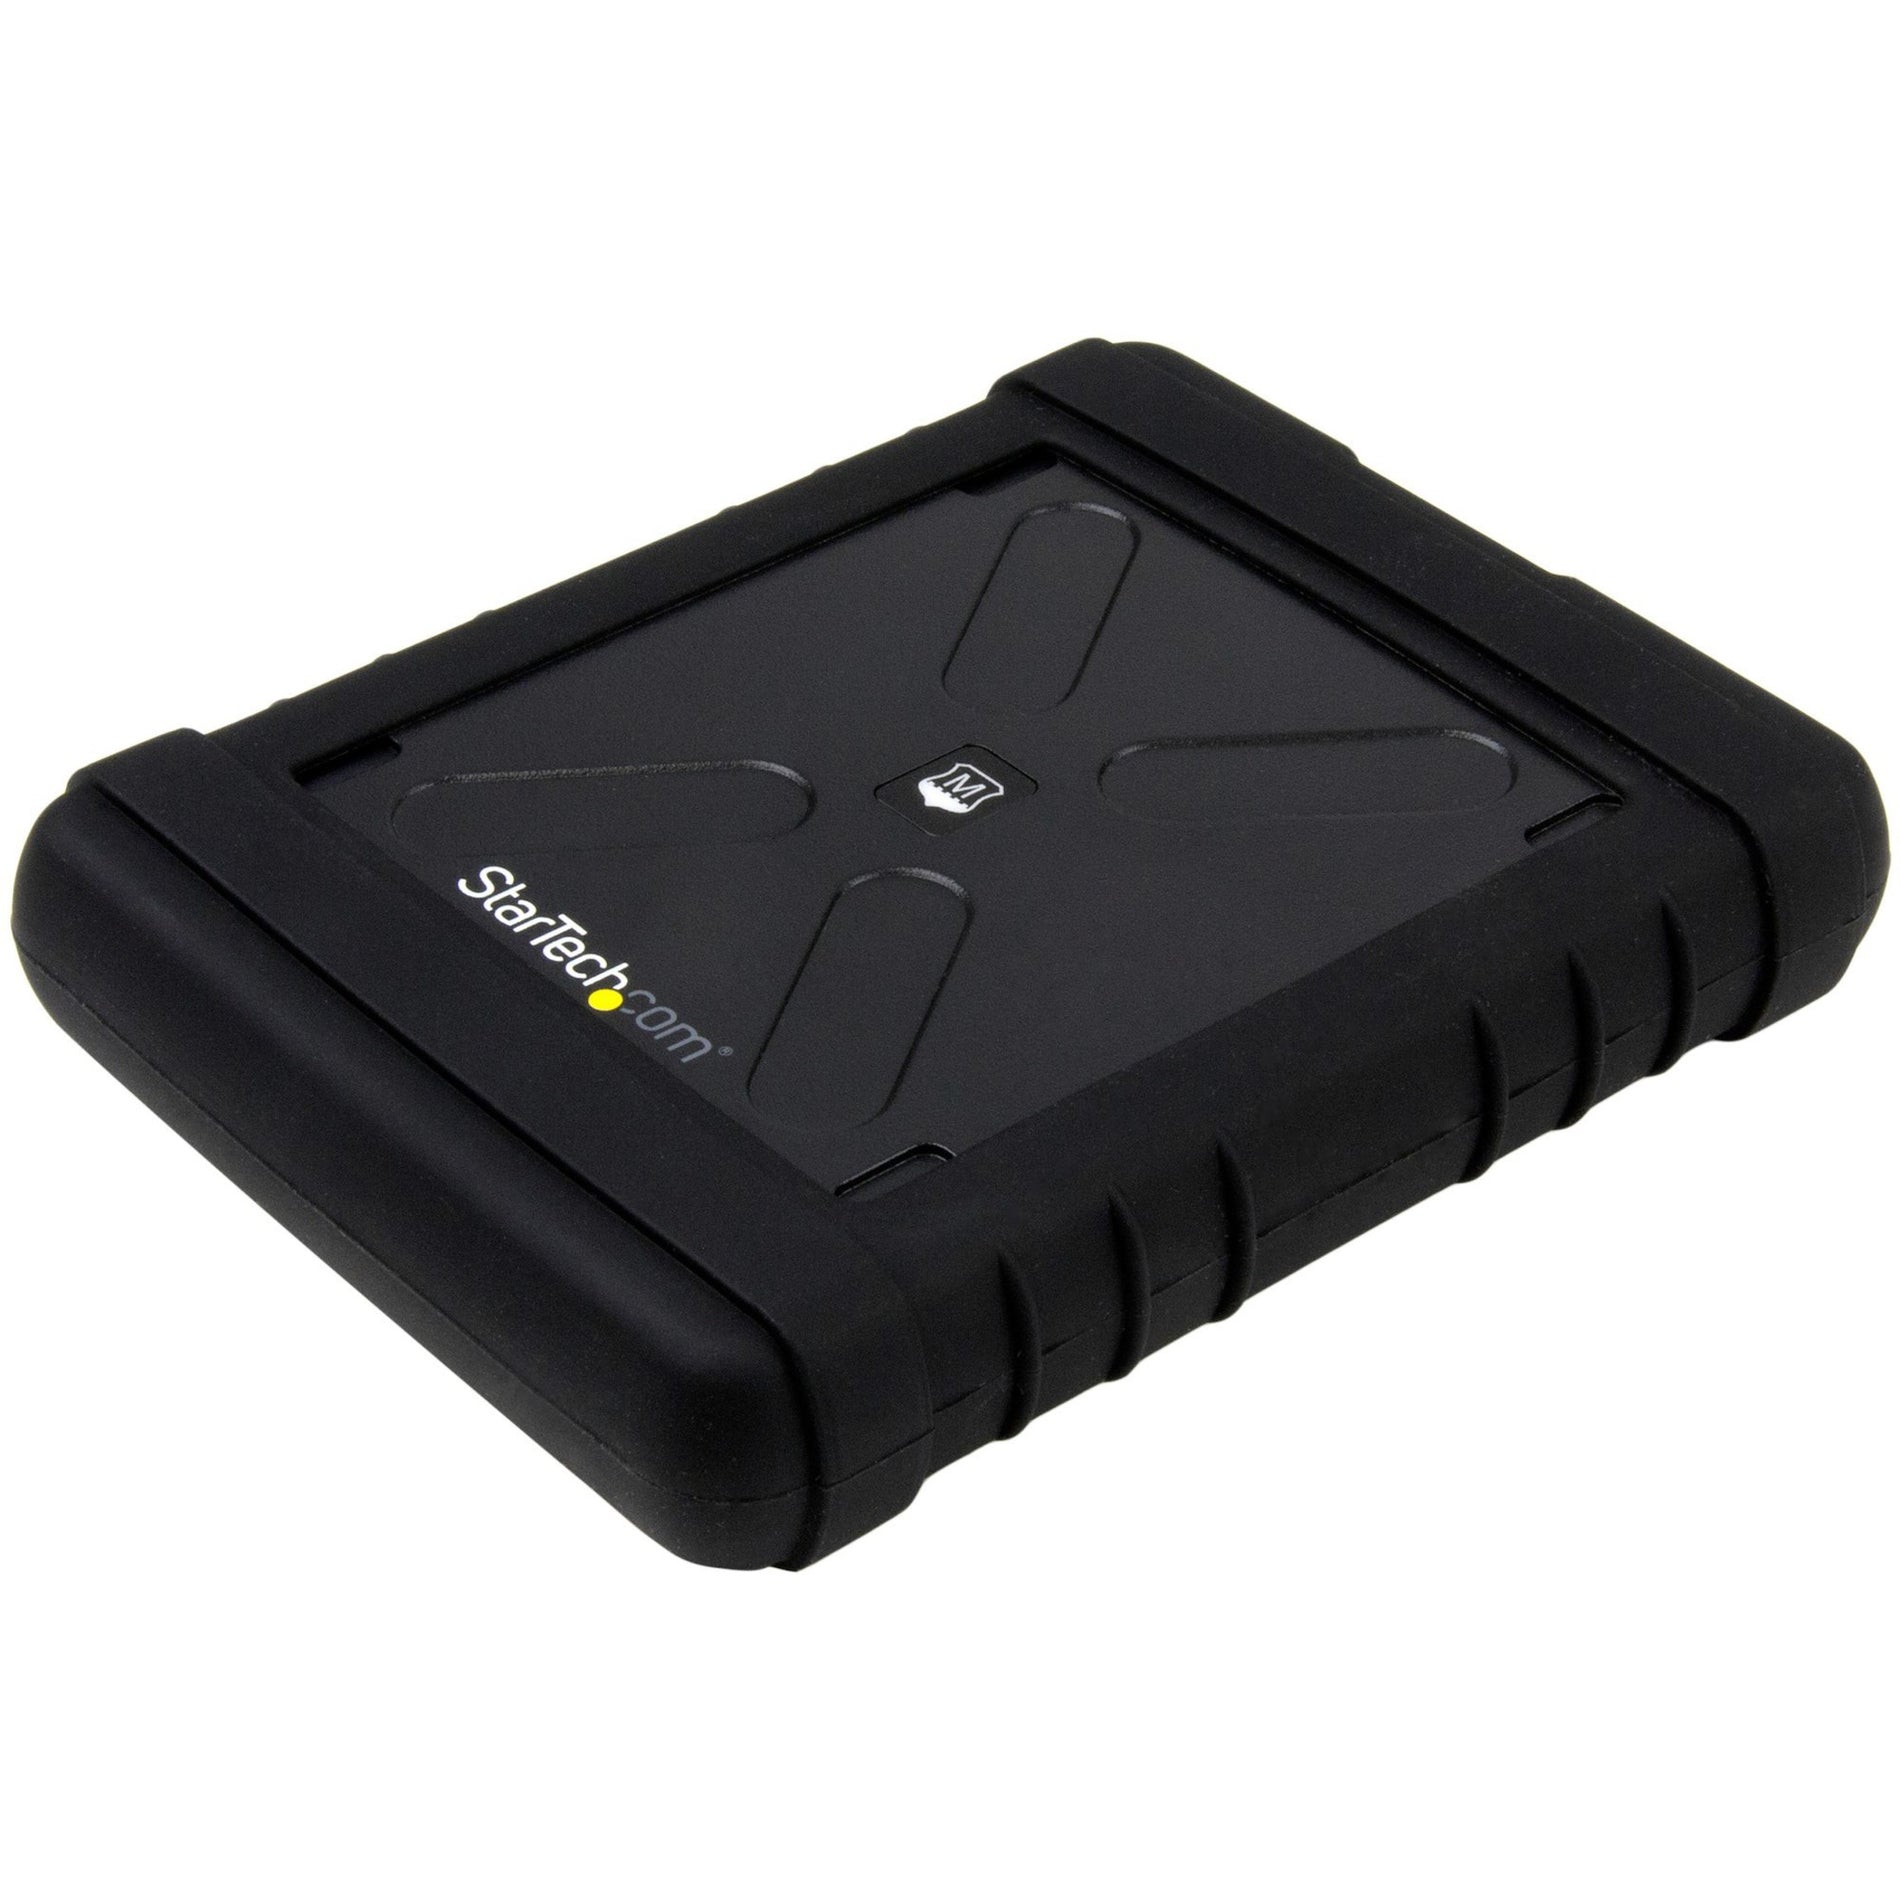 StarTech.com S251BRU33 Rugged Hard Drive Enclosure - USB 3.0 to 2.5in SATA 6Gbps HDD or SSD - UASP, Durable and Fast External Storage Solution